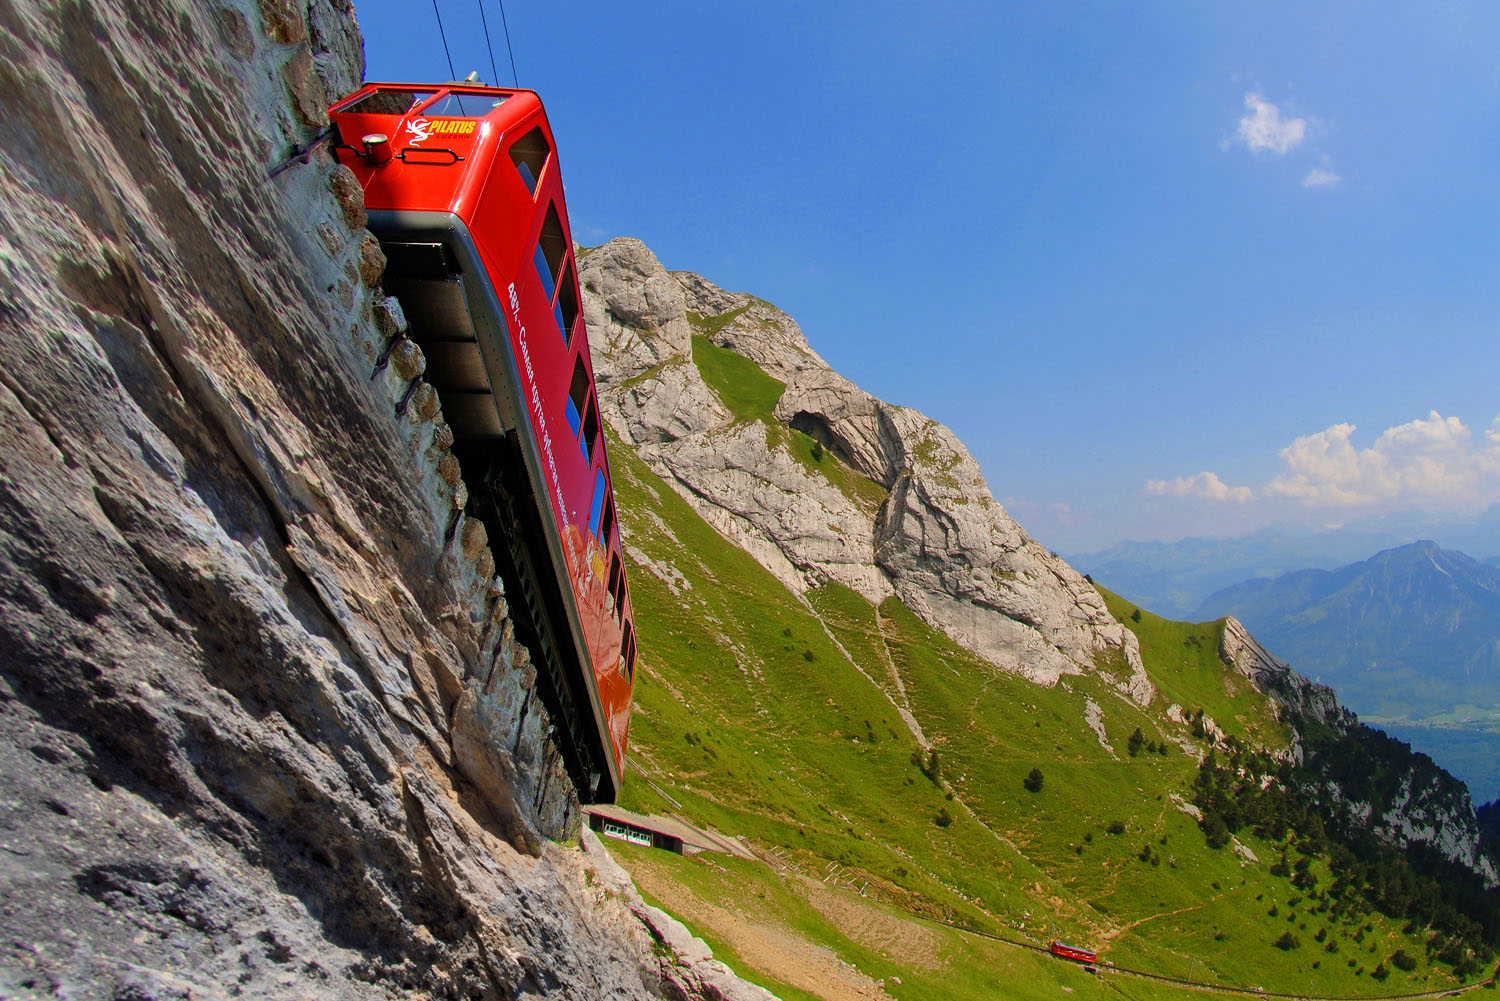 Take a journey up to the clouds on Switzerland’s steepest cogwheel railway.